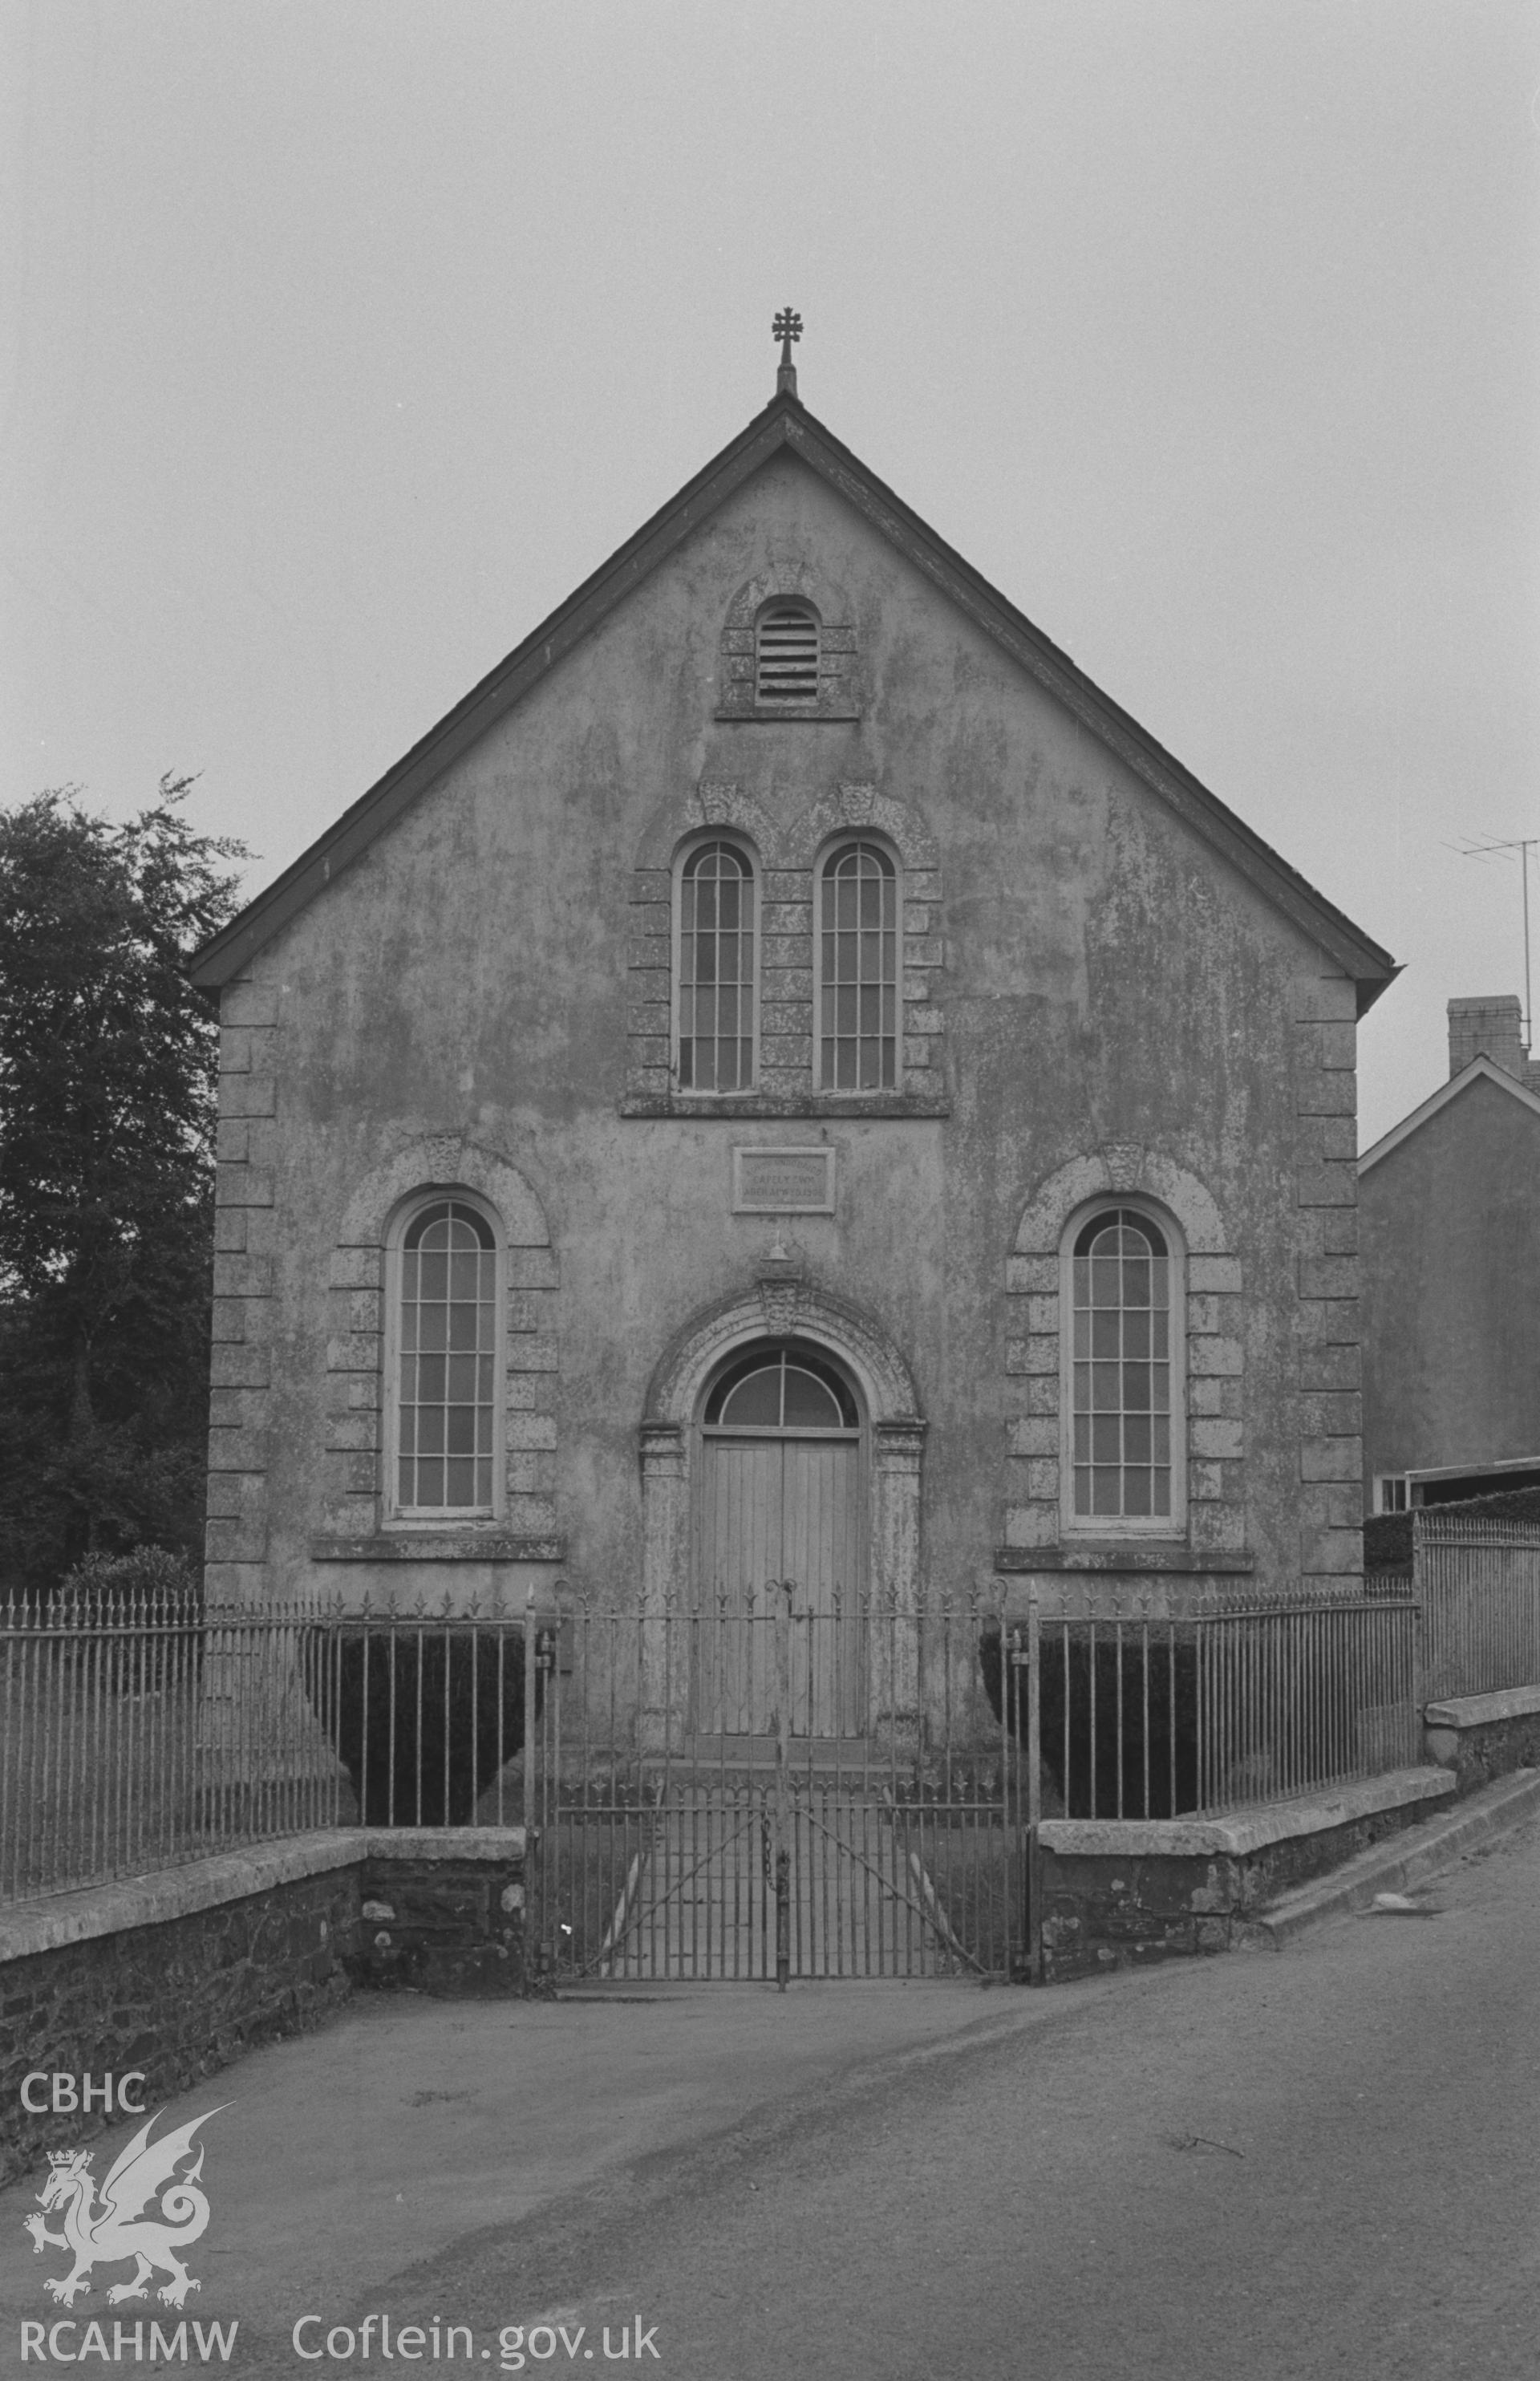 Digital copy of a black and white negative showing Capel-y-Cwm Welsh Unitarian Chapel, on the north side of the main road at Cwmsychbant, Llanwenog. Photographed by Arthur O. Chater in September 1966 looking east from Grid Reference SN 476 462.